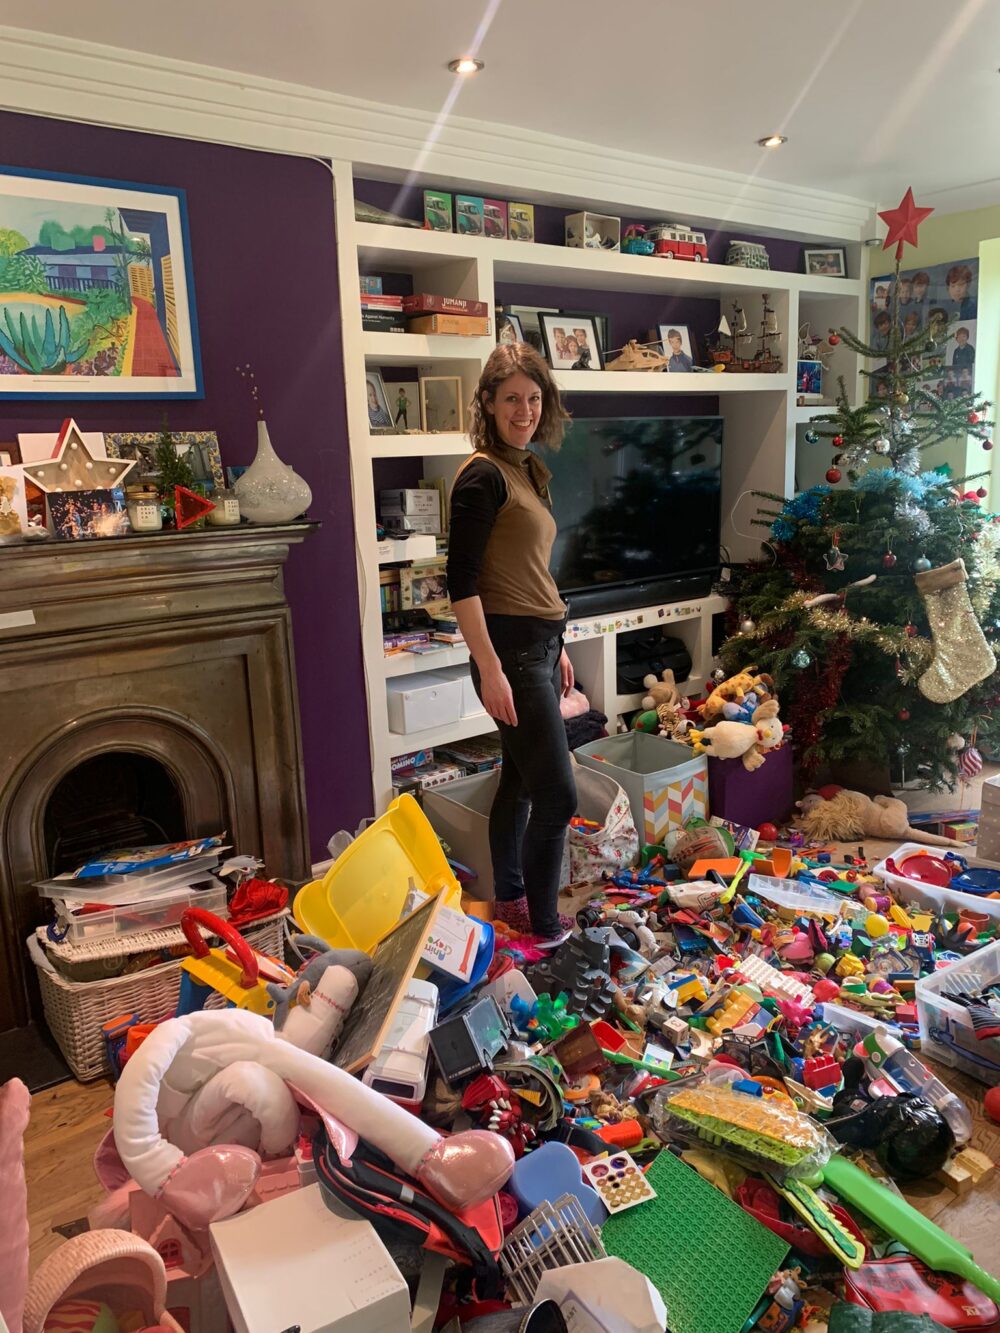 A woman standing in a living room, surrounded by lots of toys